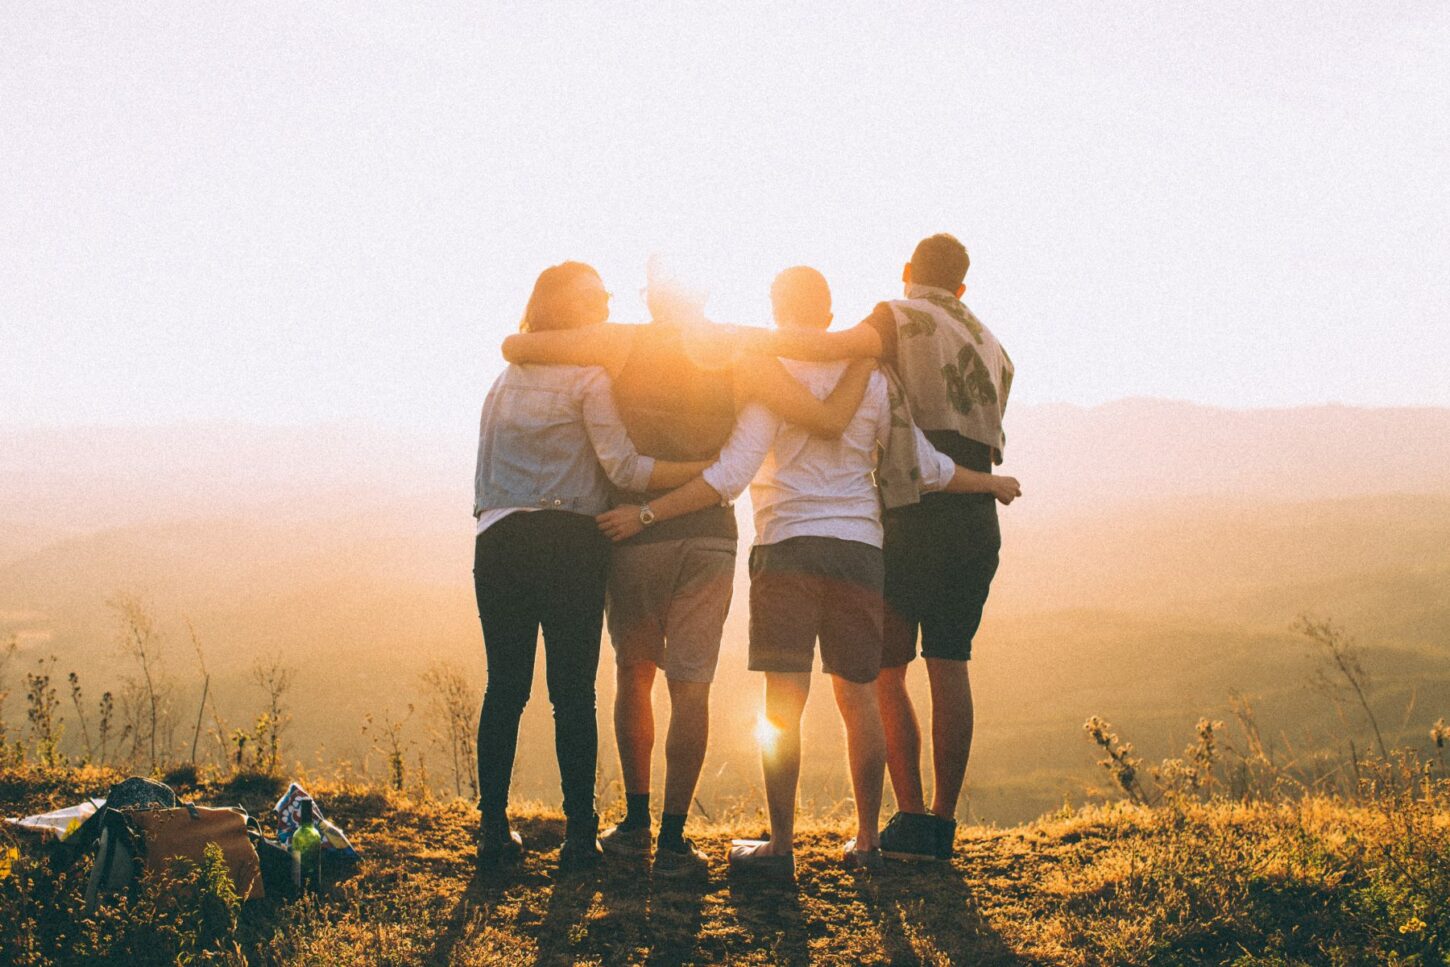 there are four students watching the sunrise and friendship